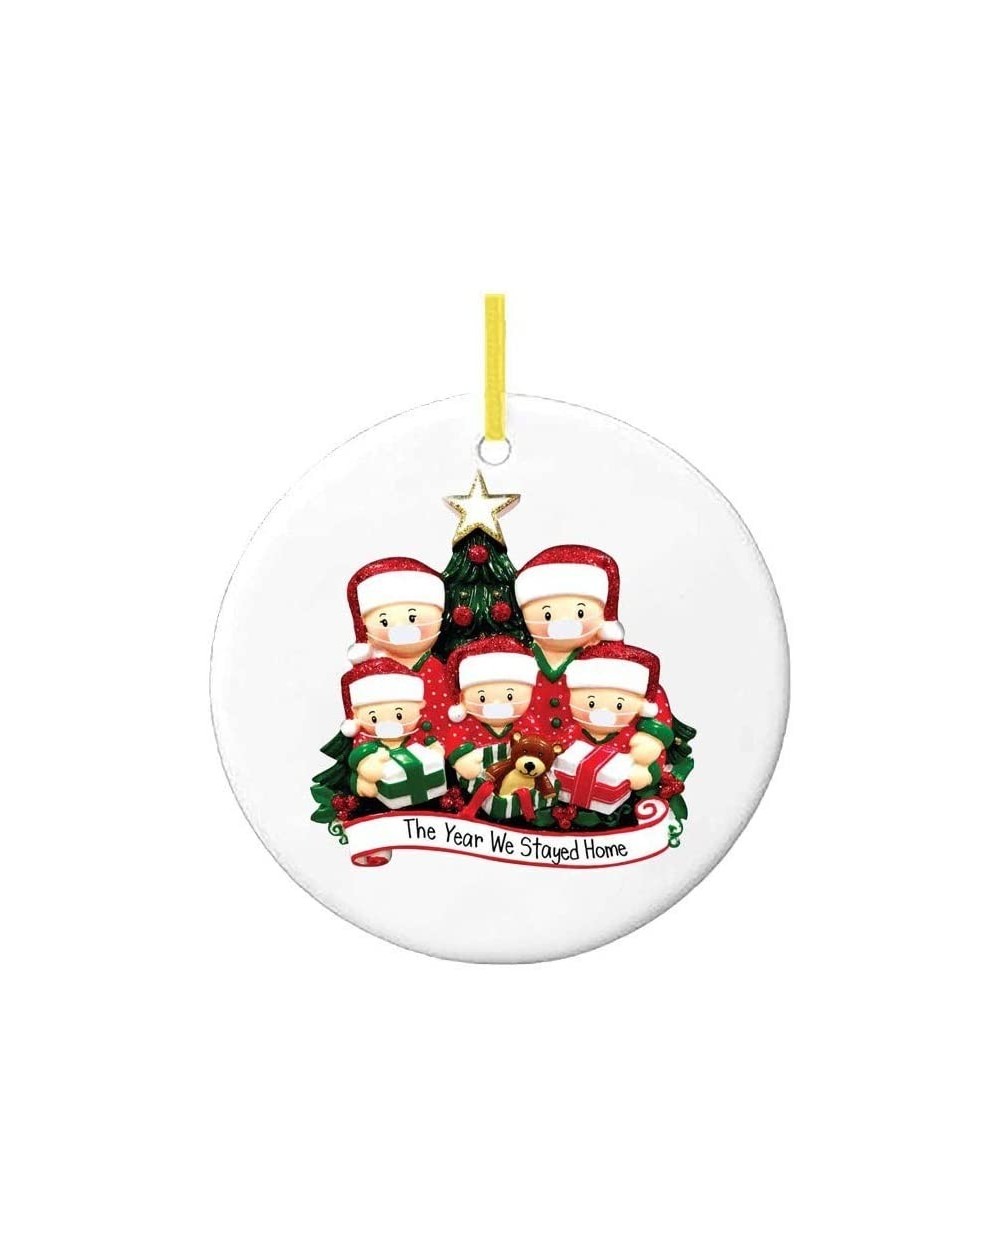 Ornaments 2020 Christmas Pendant Hanging Tree with Family Members Holiday Creative Free Personalizing Decoration Gift (C-Fami...